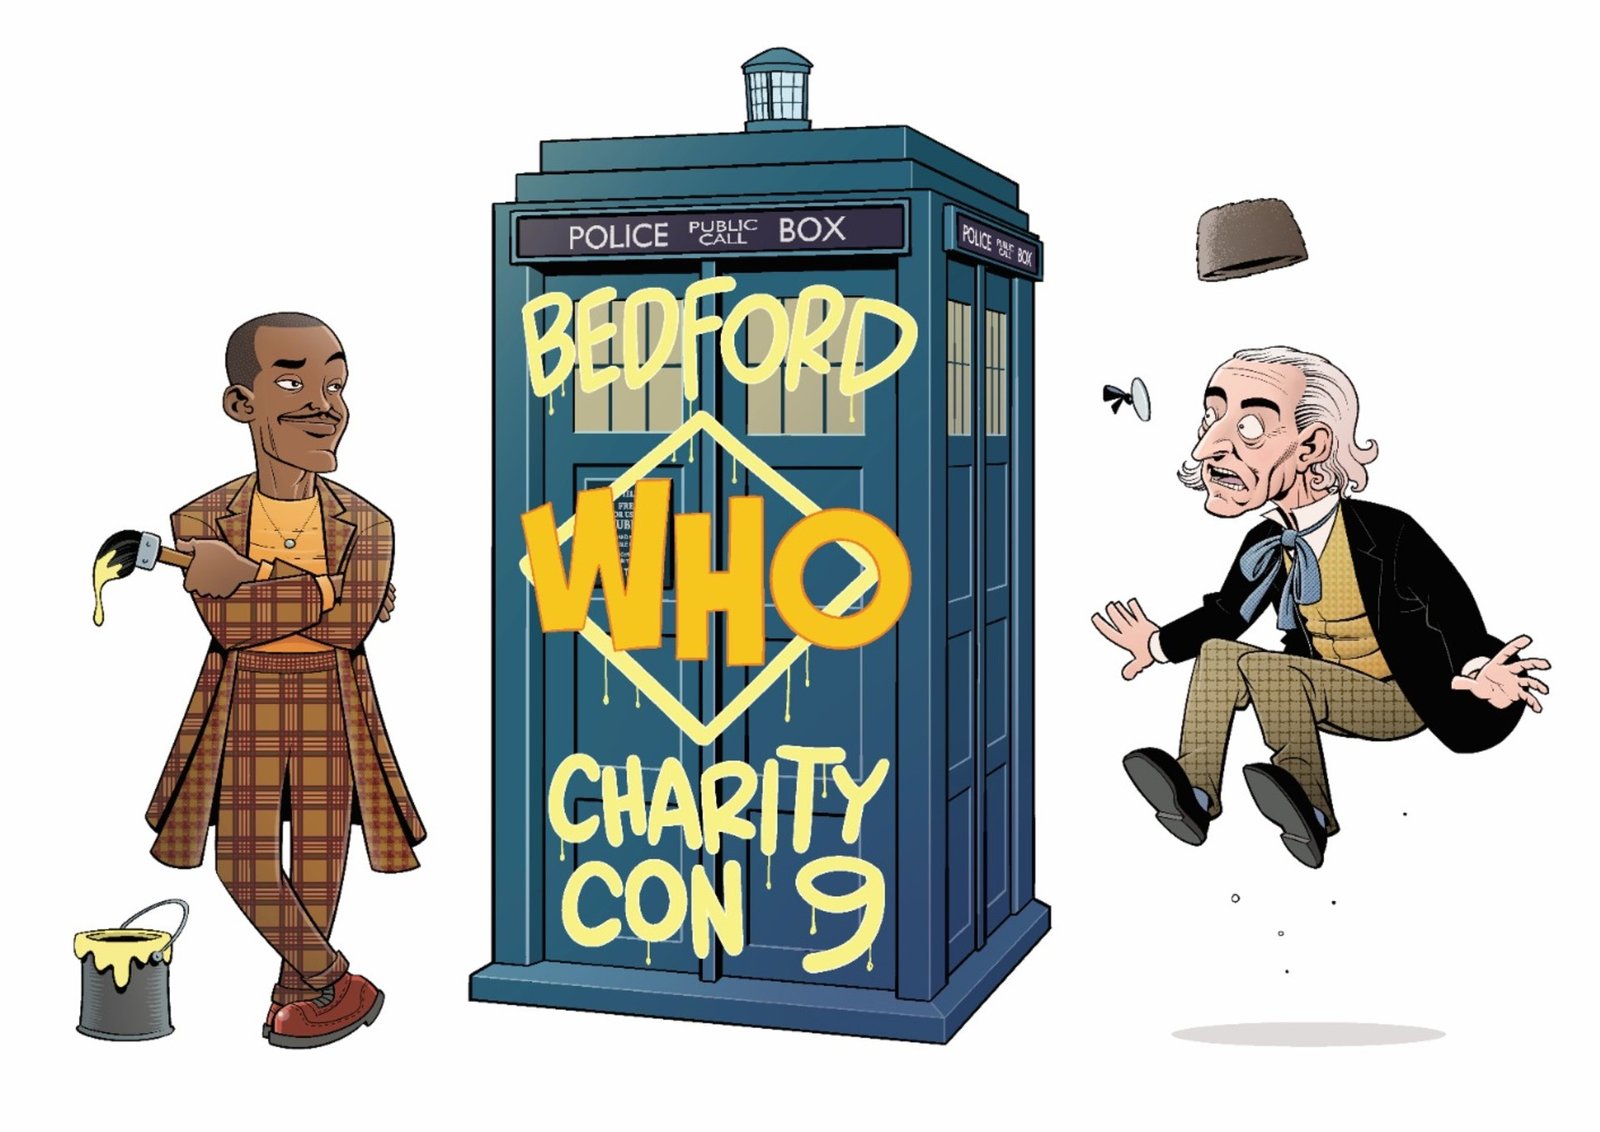 Why The Doctor Who Companion Exists: A Reflection on the Bedford Who Charity Con